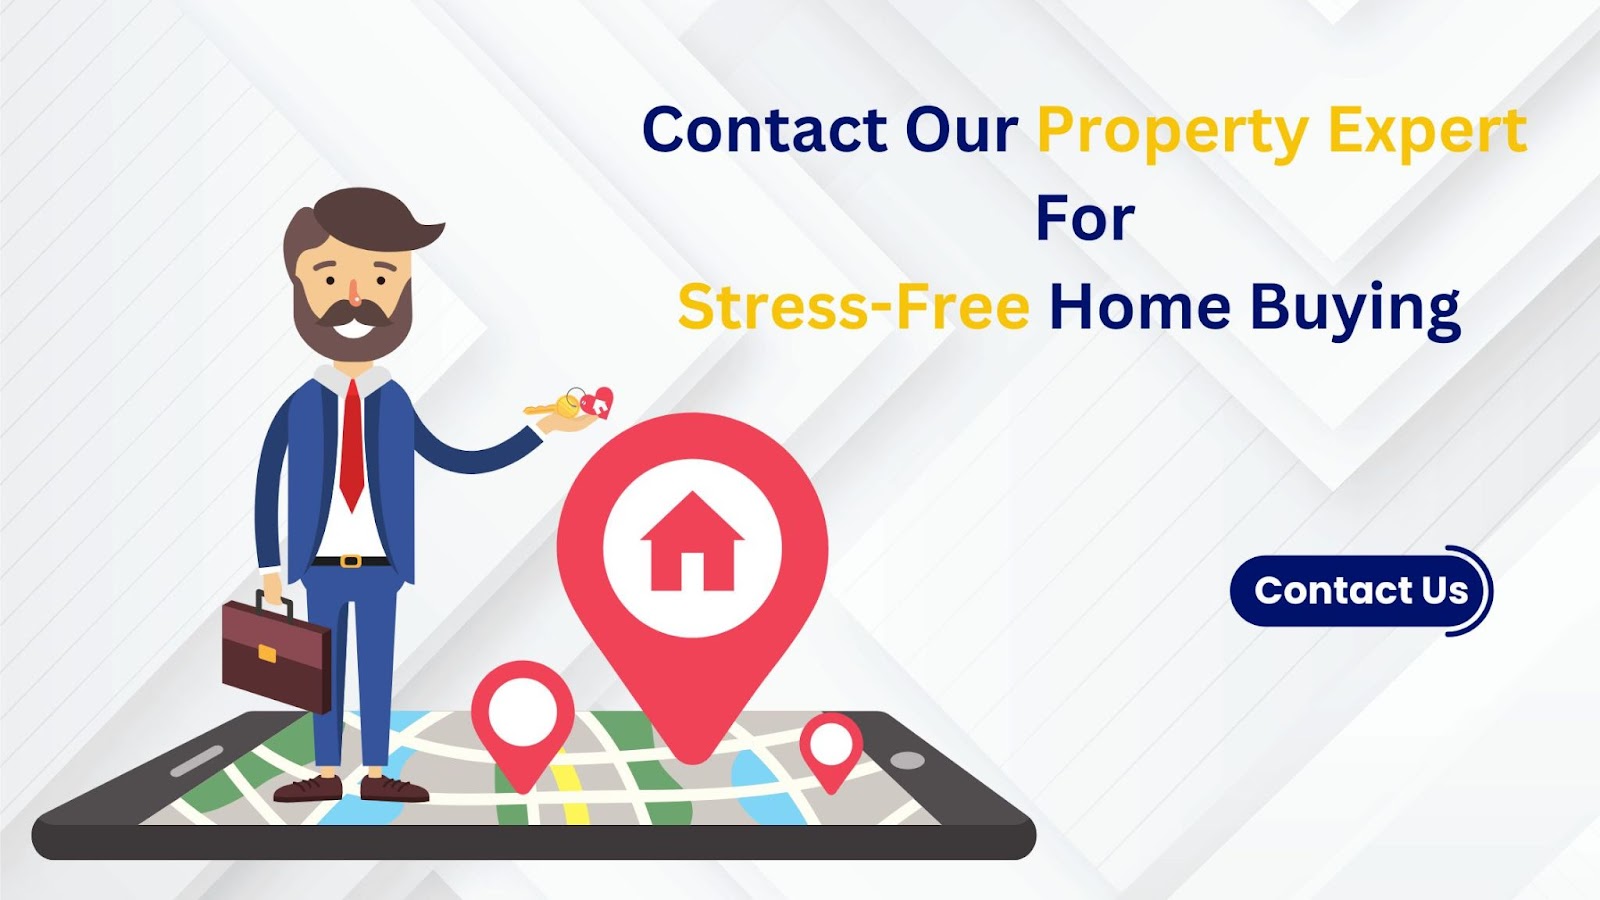 Contact Our Property Expert For Hassle-FREE Home Buying